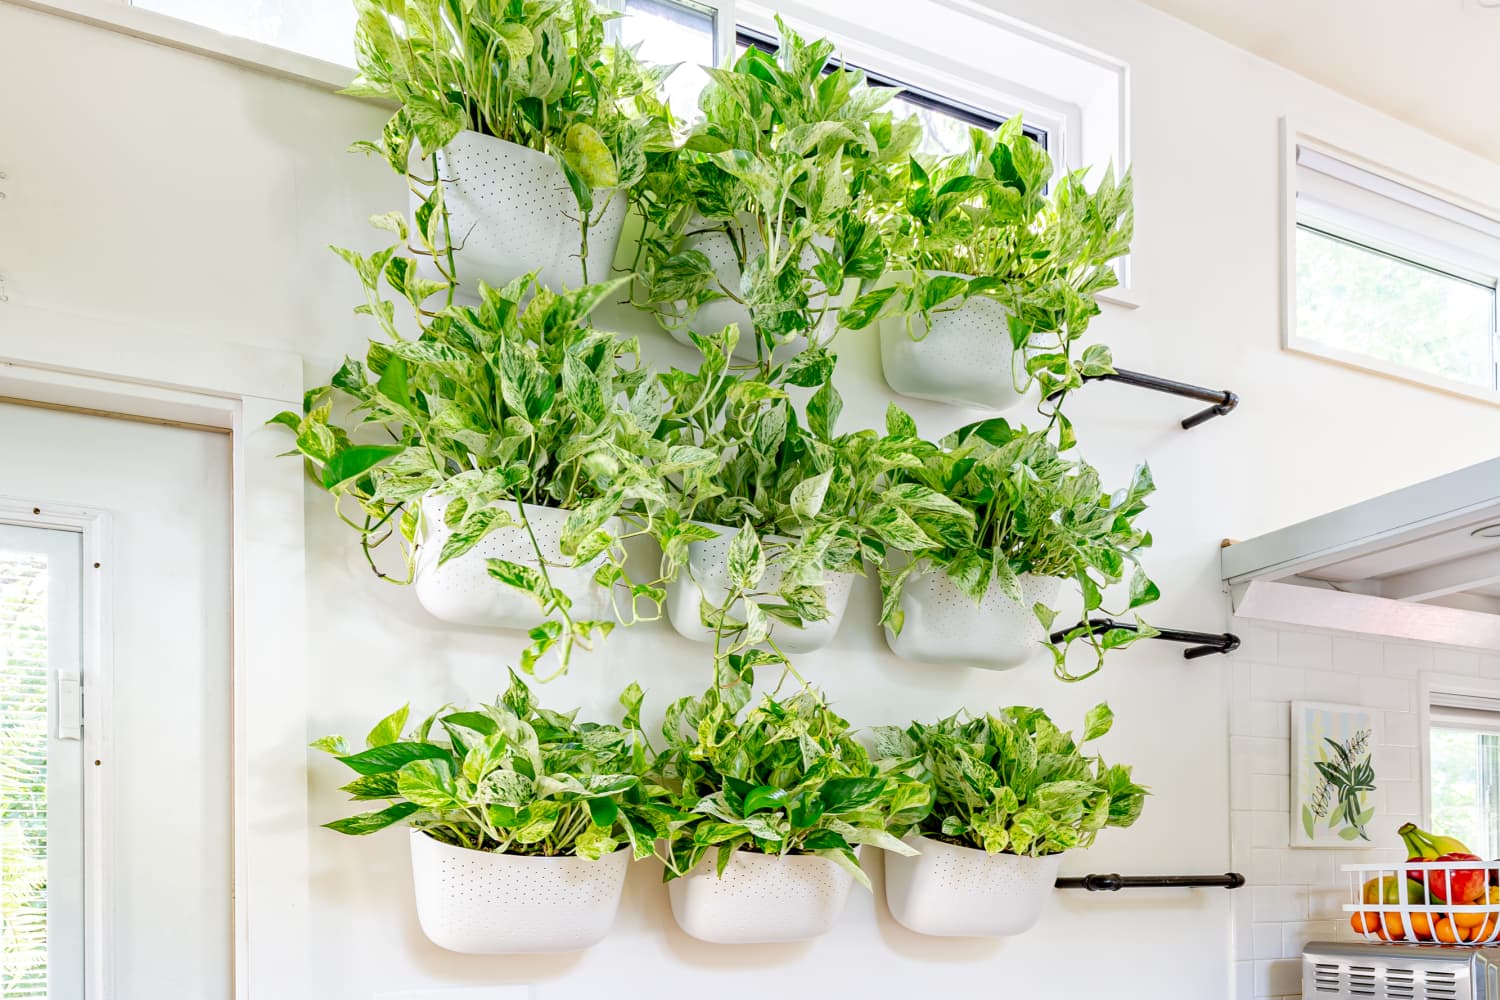 Pothos Plant Hanging Ideas: Elevate Your Green Space!